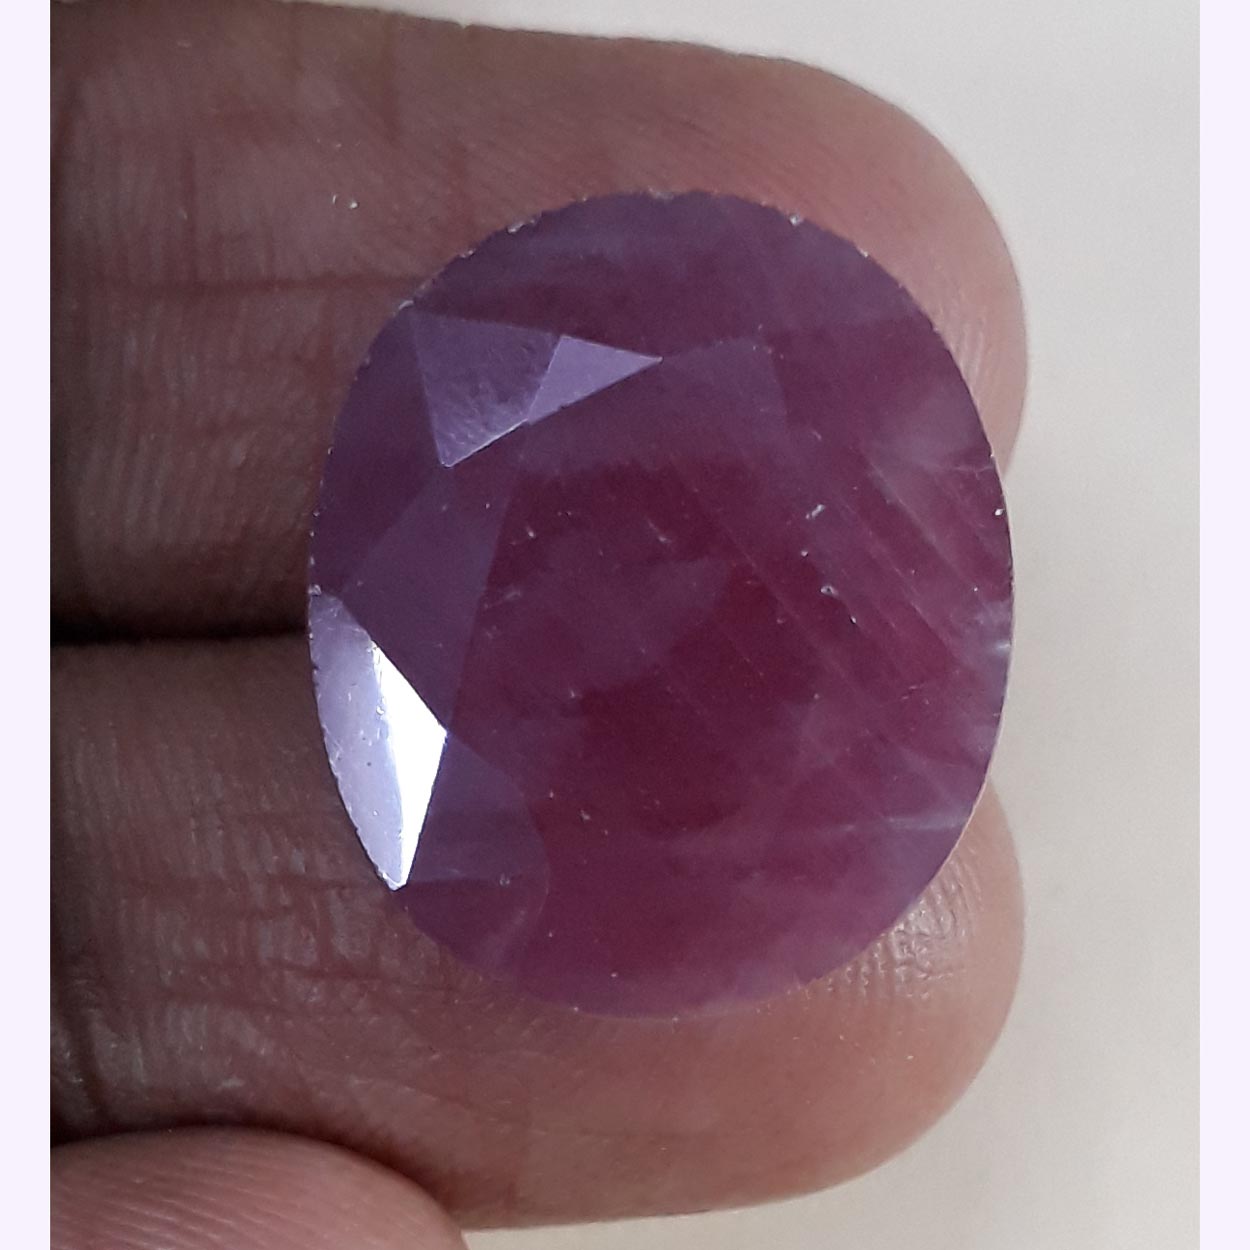 21.39 Carat Natural New Burma Ruby with Govt. Lab Certificate